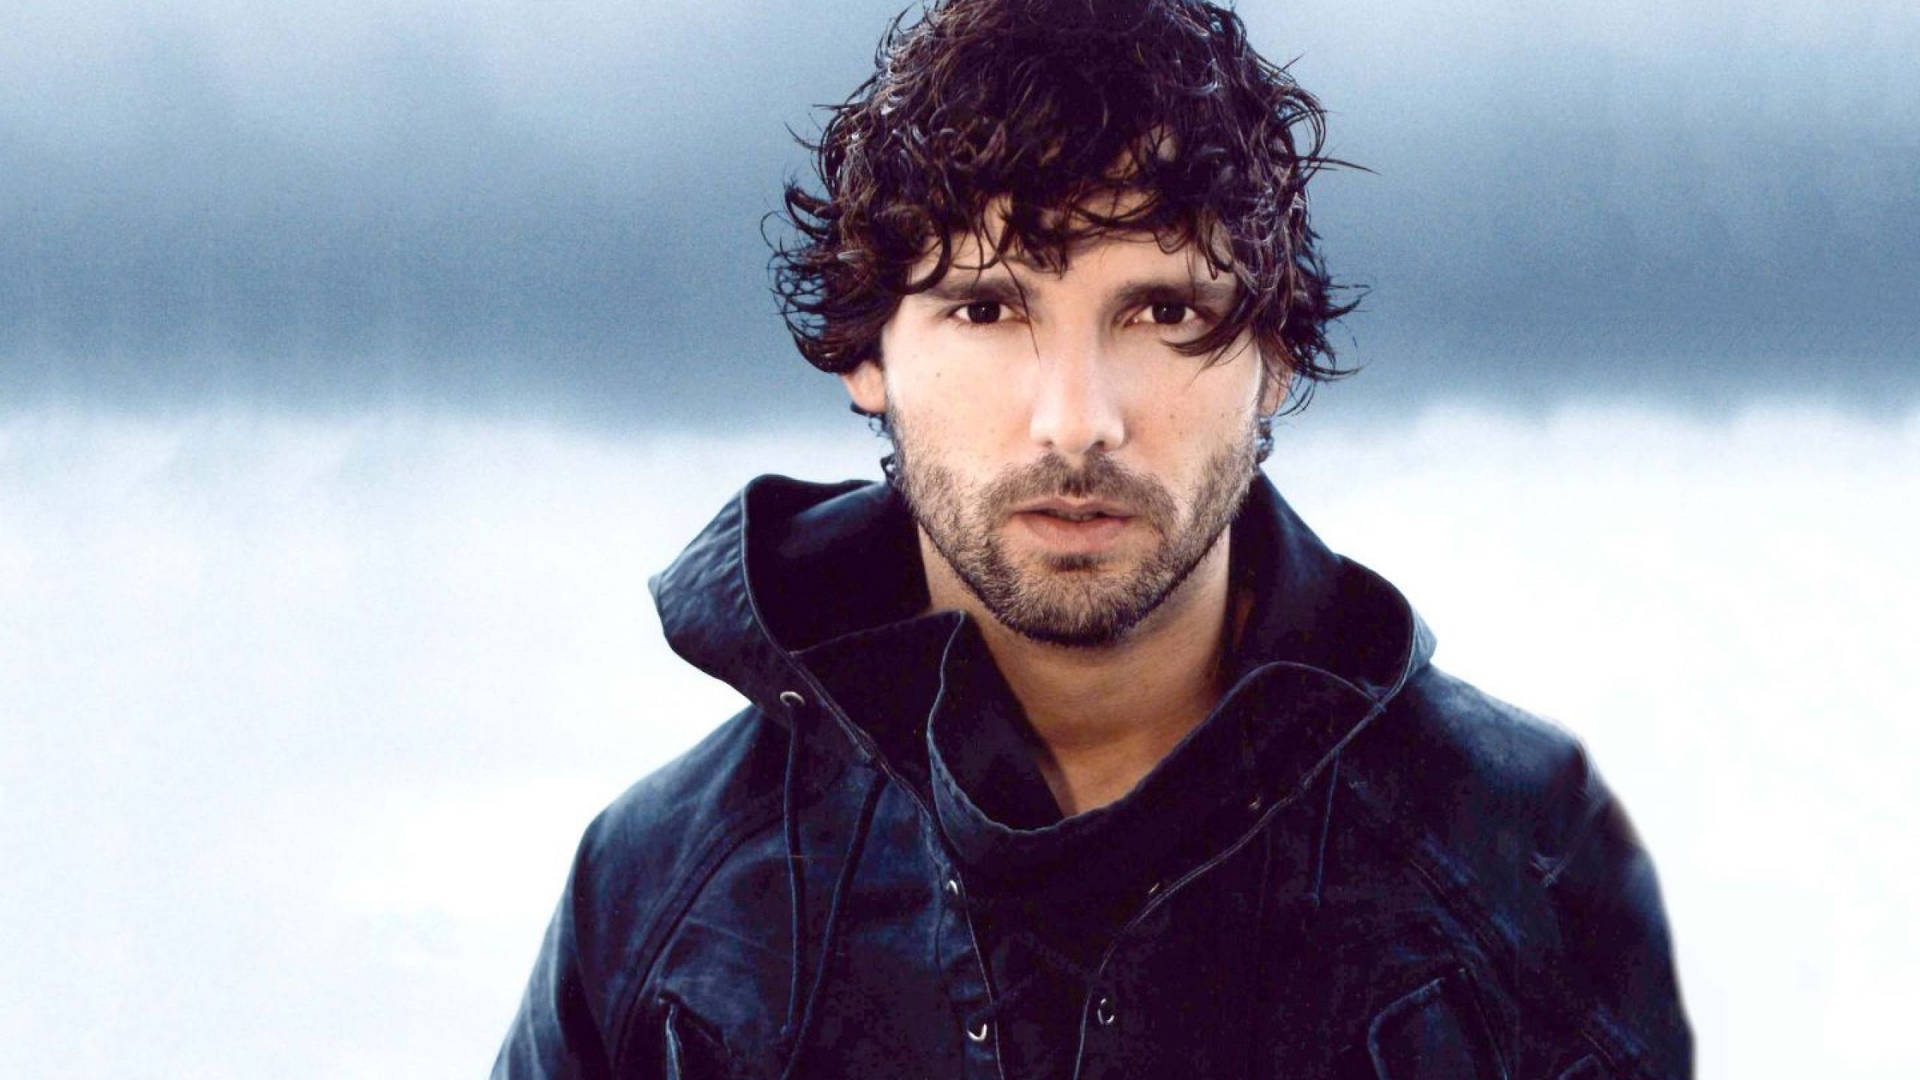 Actor Eric Bana With Curly Hair Wallpaper